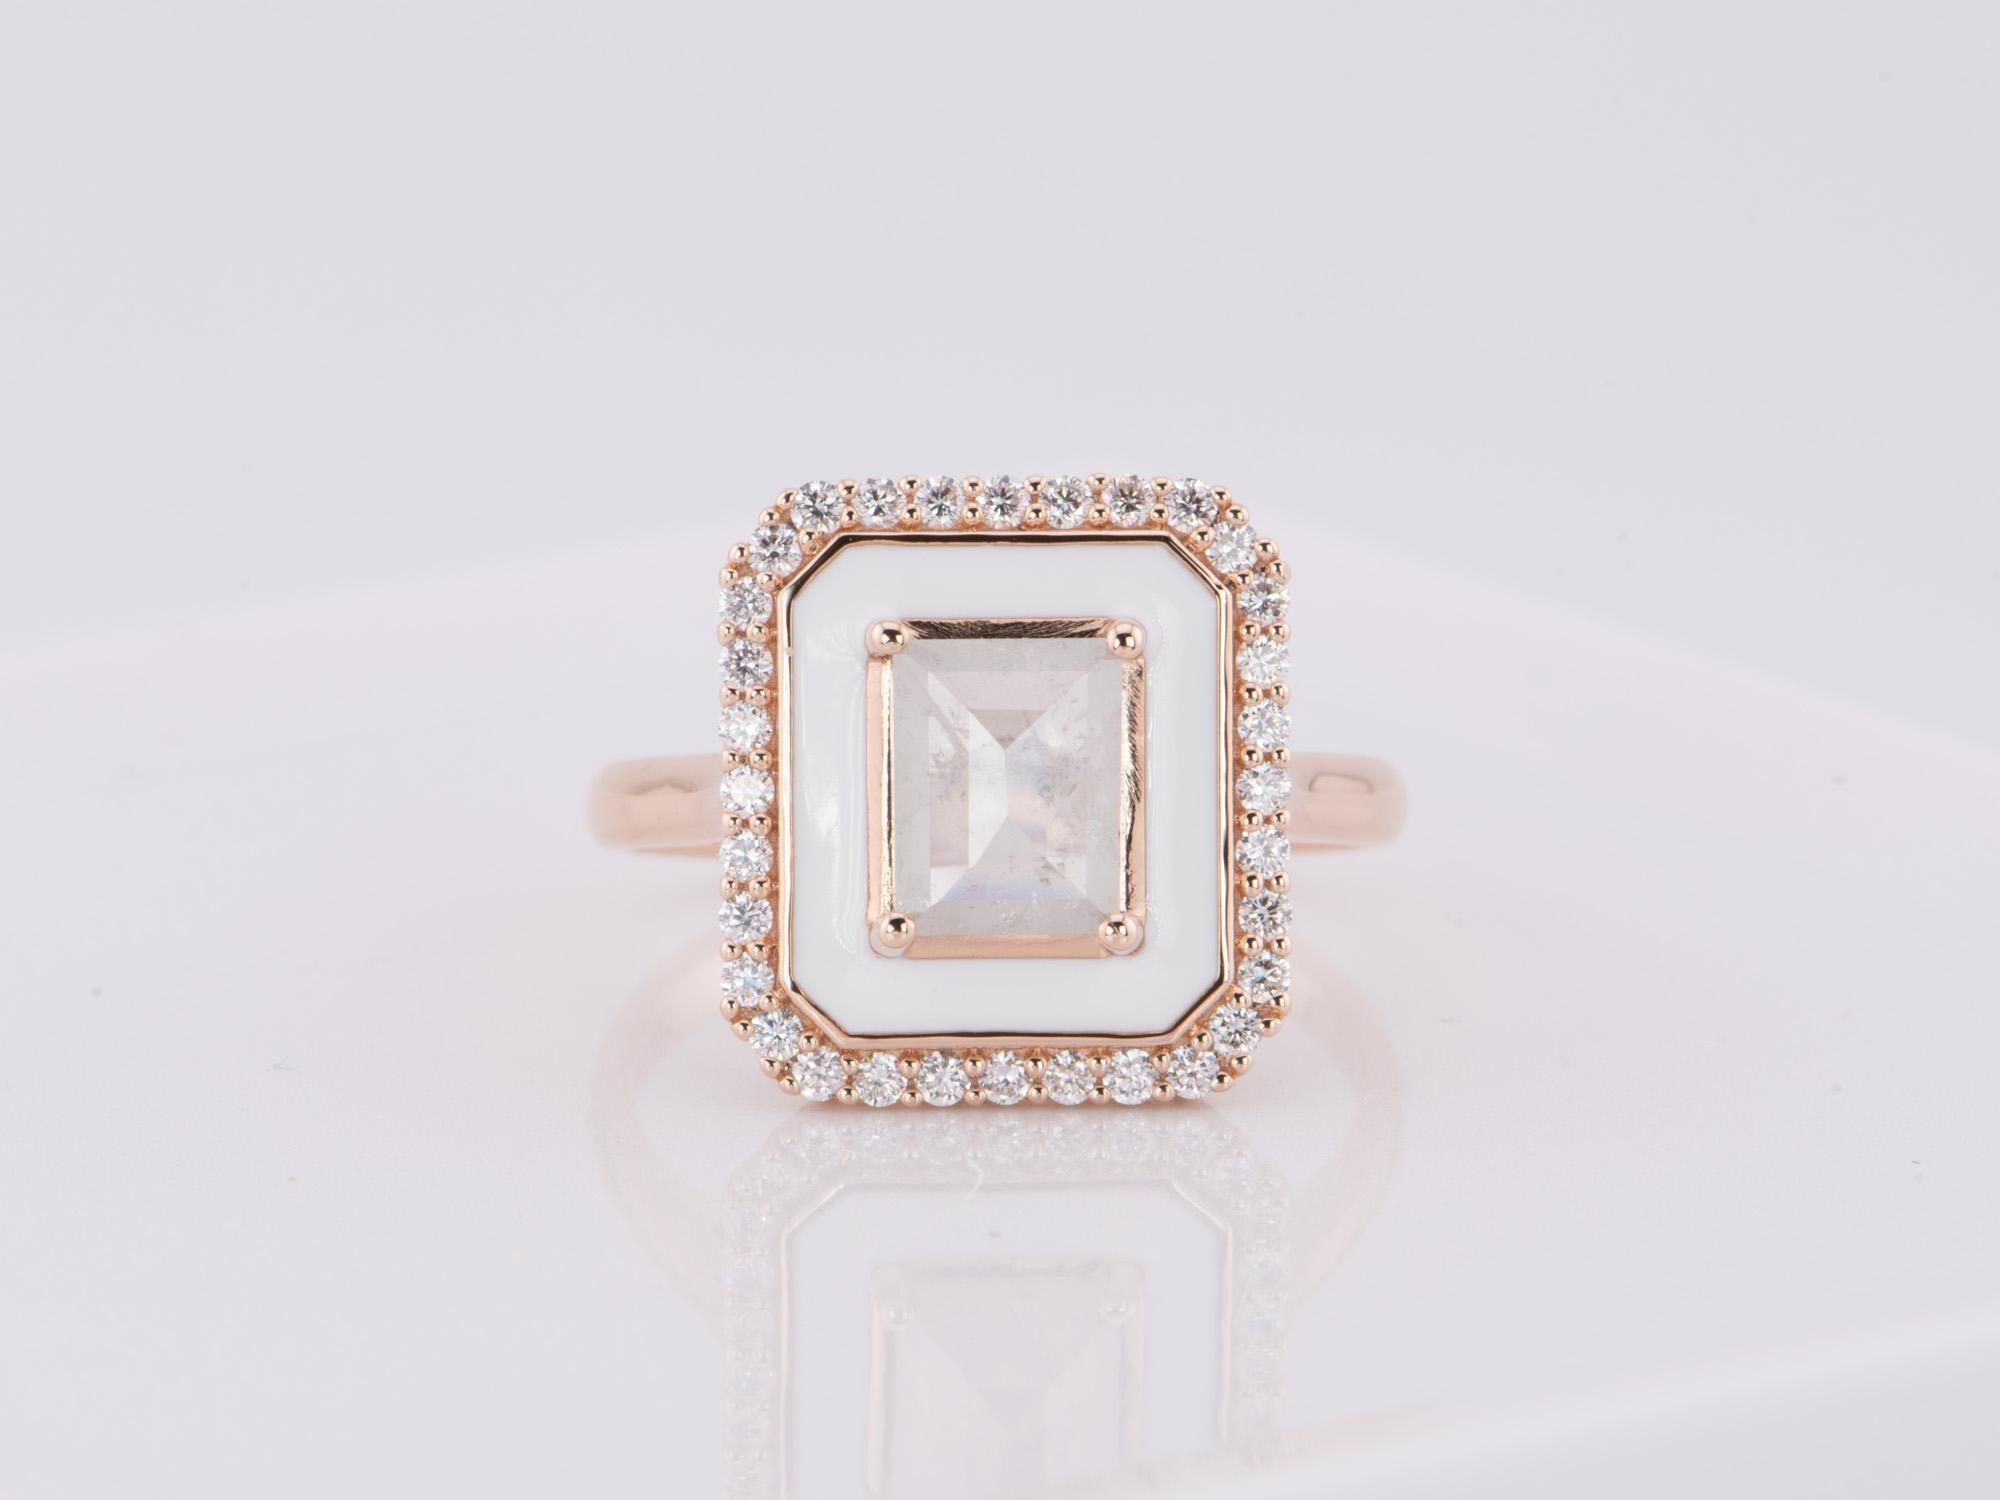 ♥ Solid 14K rose gold ring set with a translucent icy gray diamond in the center, flanked by a rose gold edge, white enamel, then an outer halo of natural brilliant diamonds
♥ Unique design! Perfectly complements the milky nature of the diamond
♥